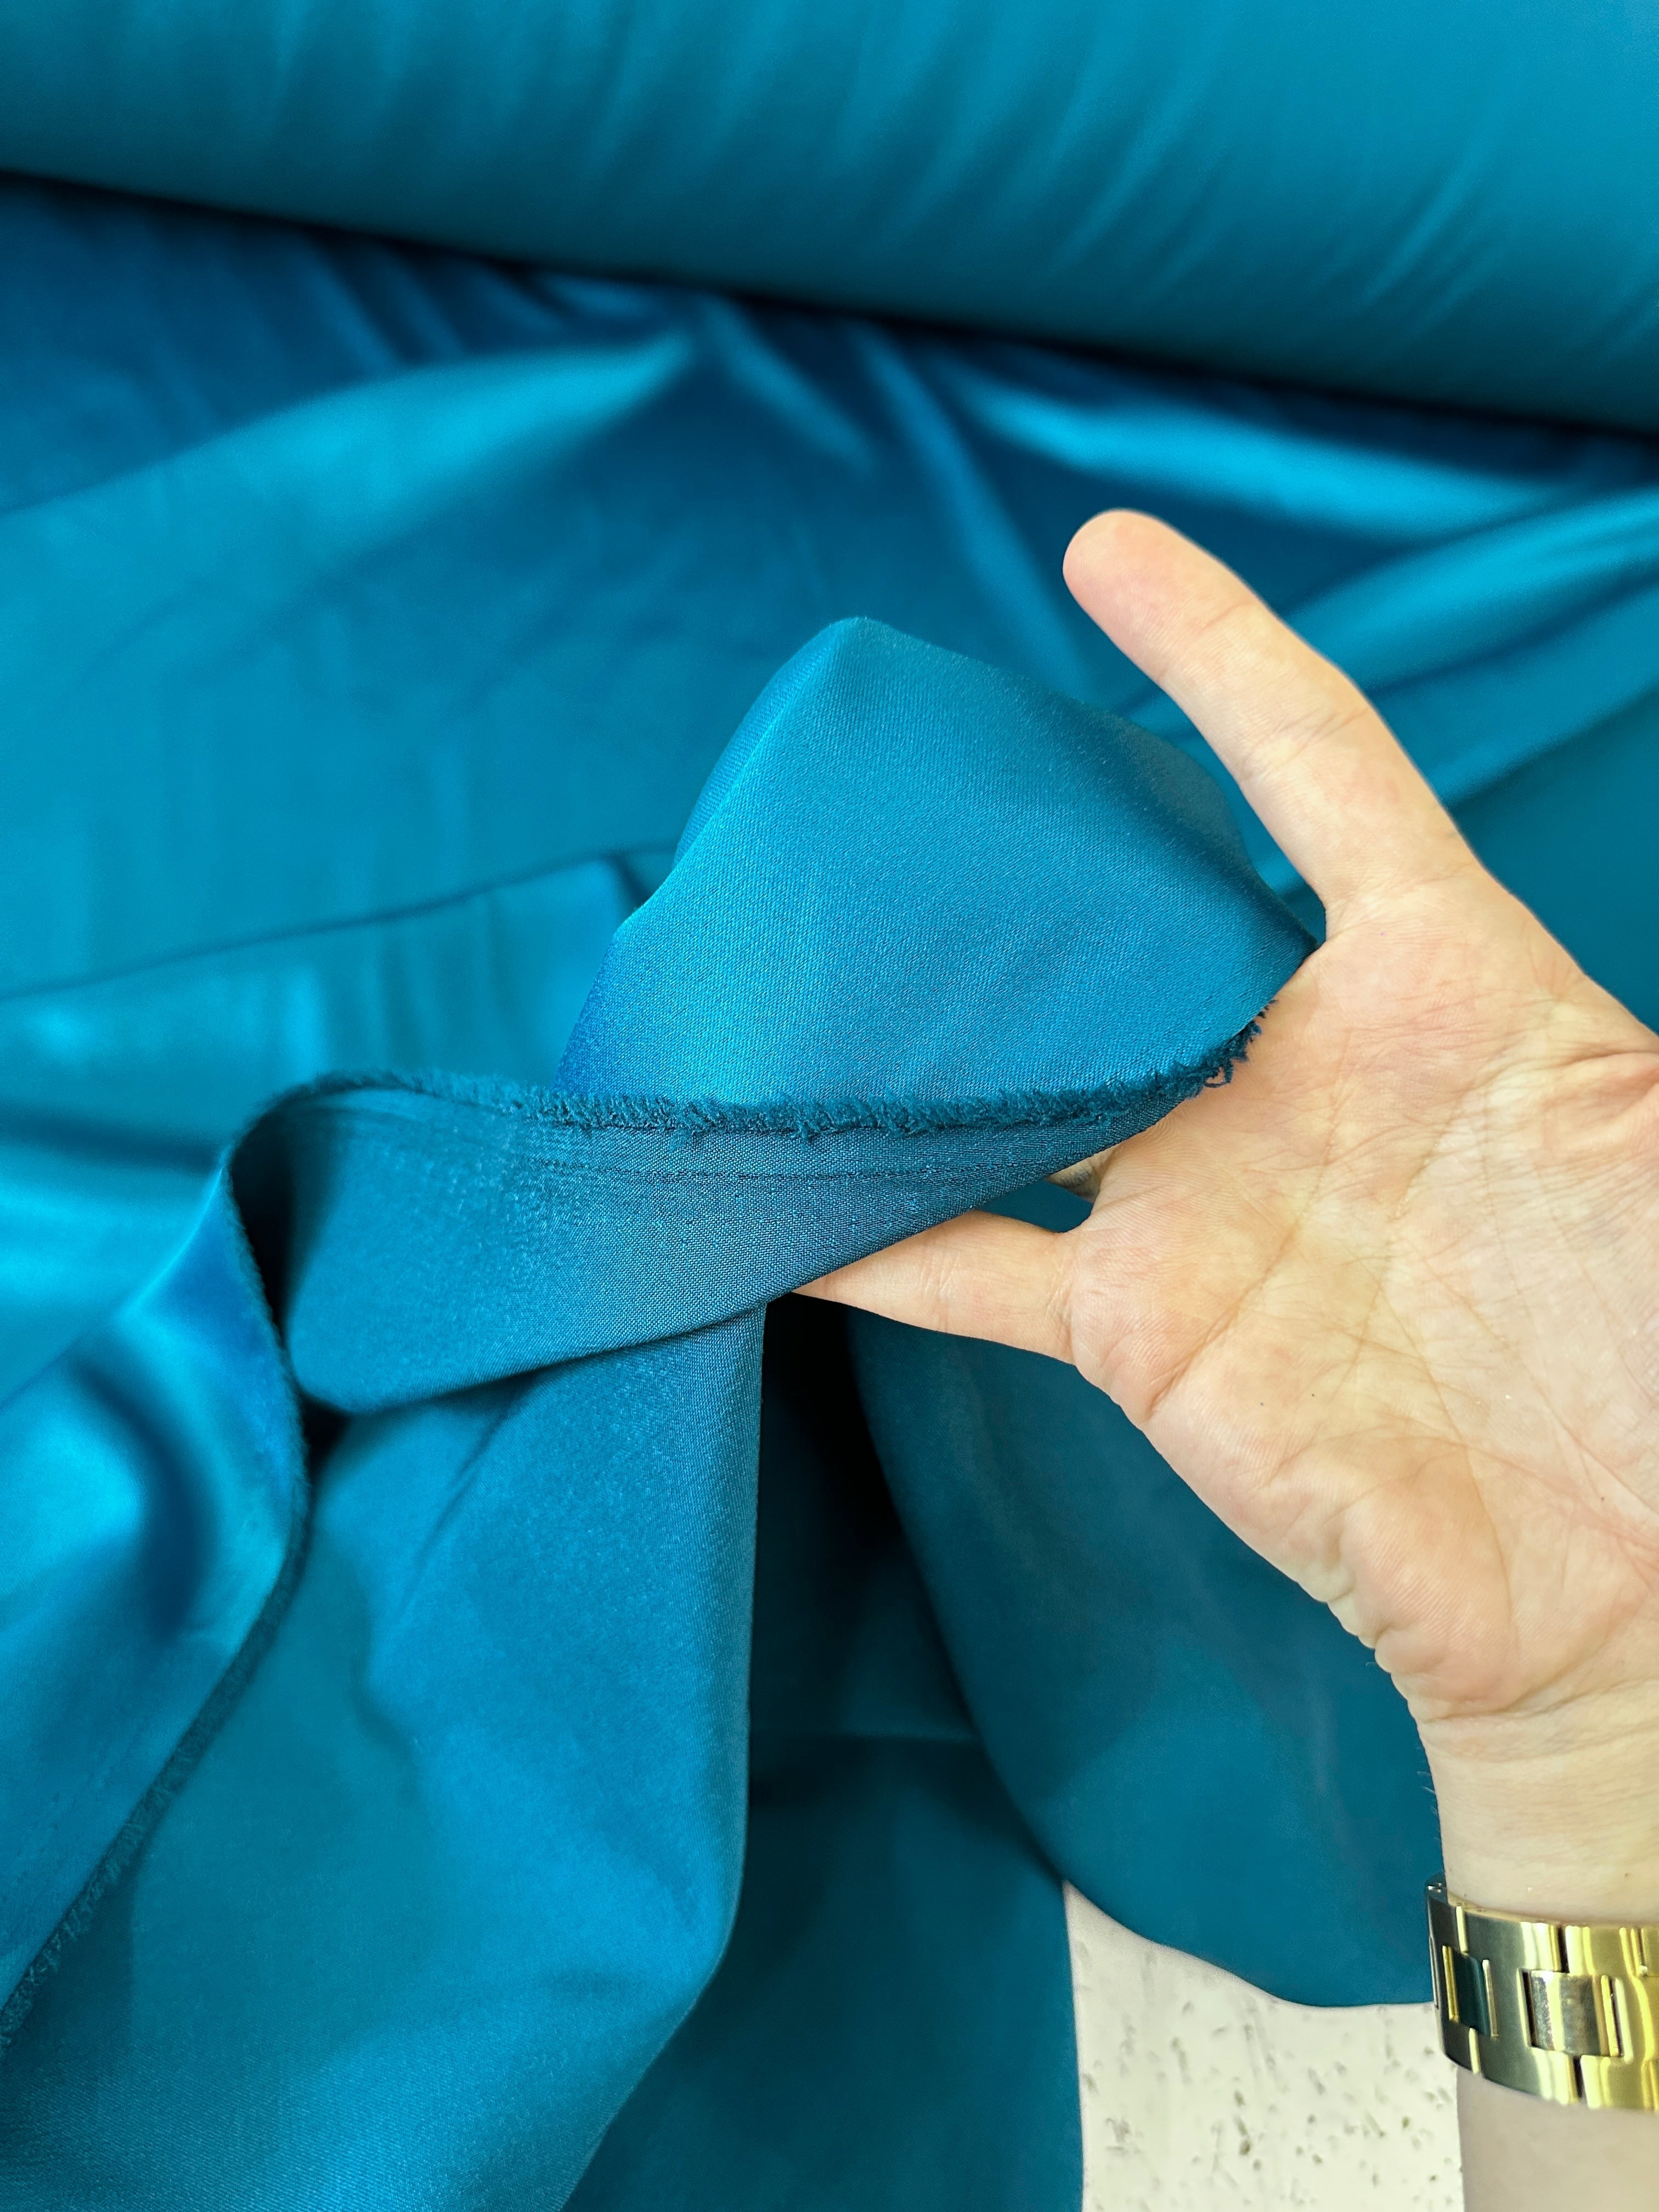 teal blue stretch crepe back satin, blue stretch crepe back satin, dark blue stretch crepe back satin, premium stretch crepe back satin, satin for bride, satin for woman, satin in low price, cheap satin, satin on sale